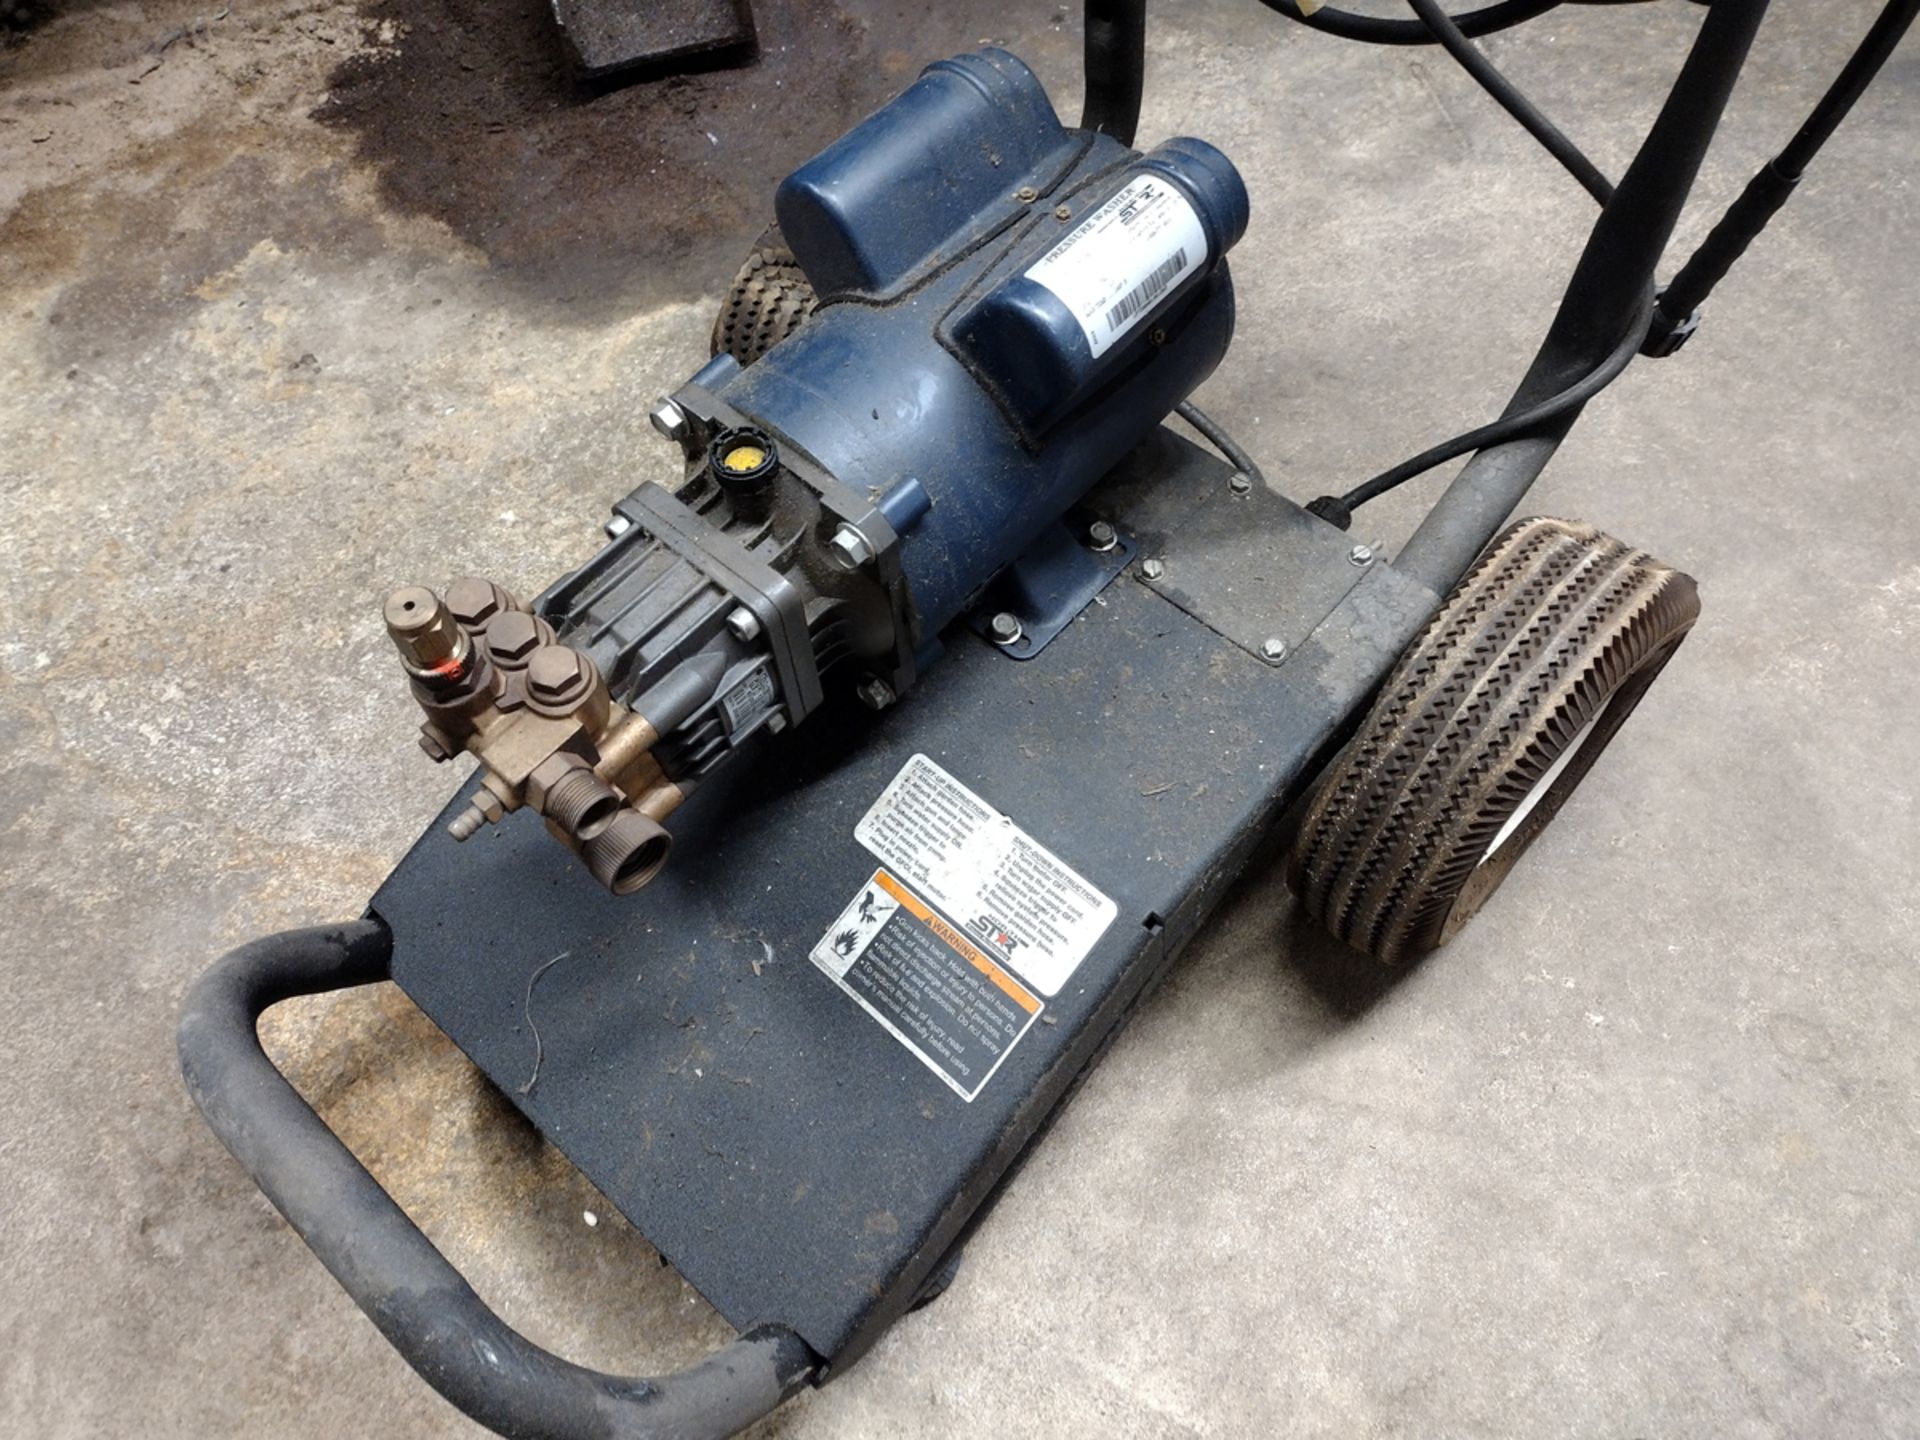 North Star 1,700psi Pressure Washer - Image 3 of 5